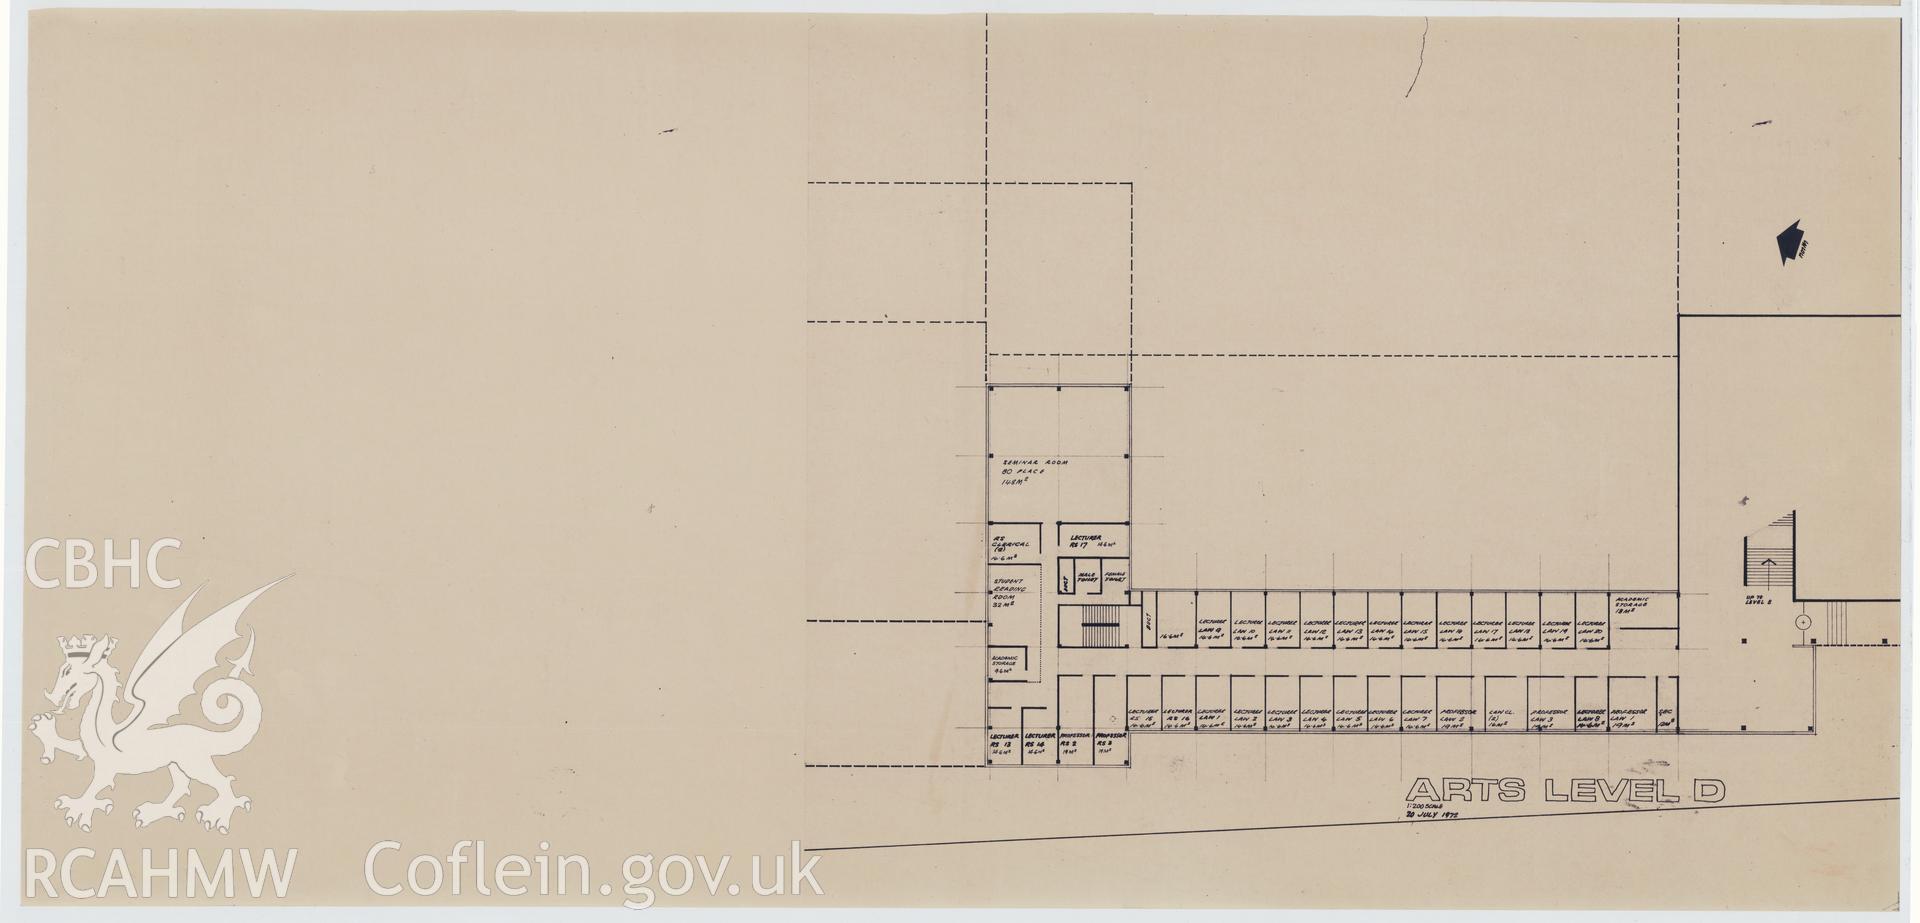 Digital copy of a plan showing Arts Level D of the proposed Library Arts Complex at University College Aberystwyth, produced by Percy Thomas Partnership. Scale 1:200.